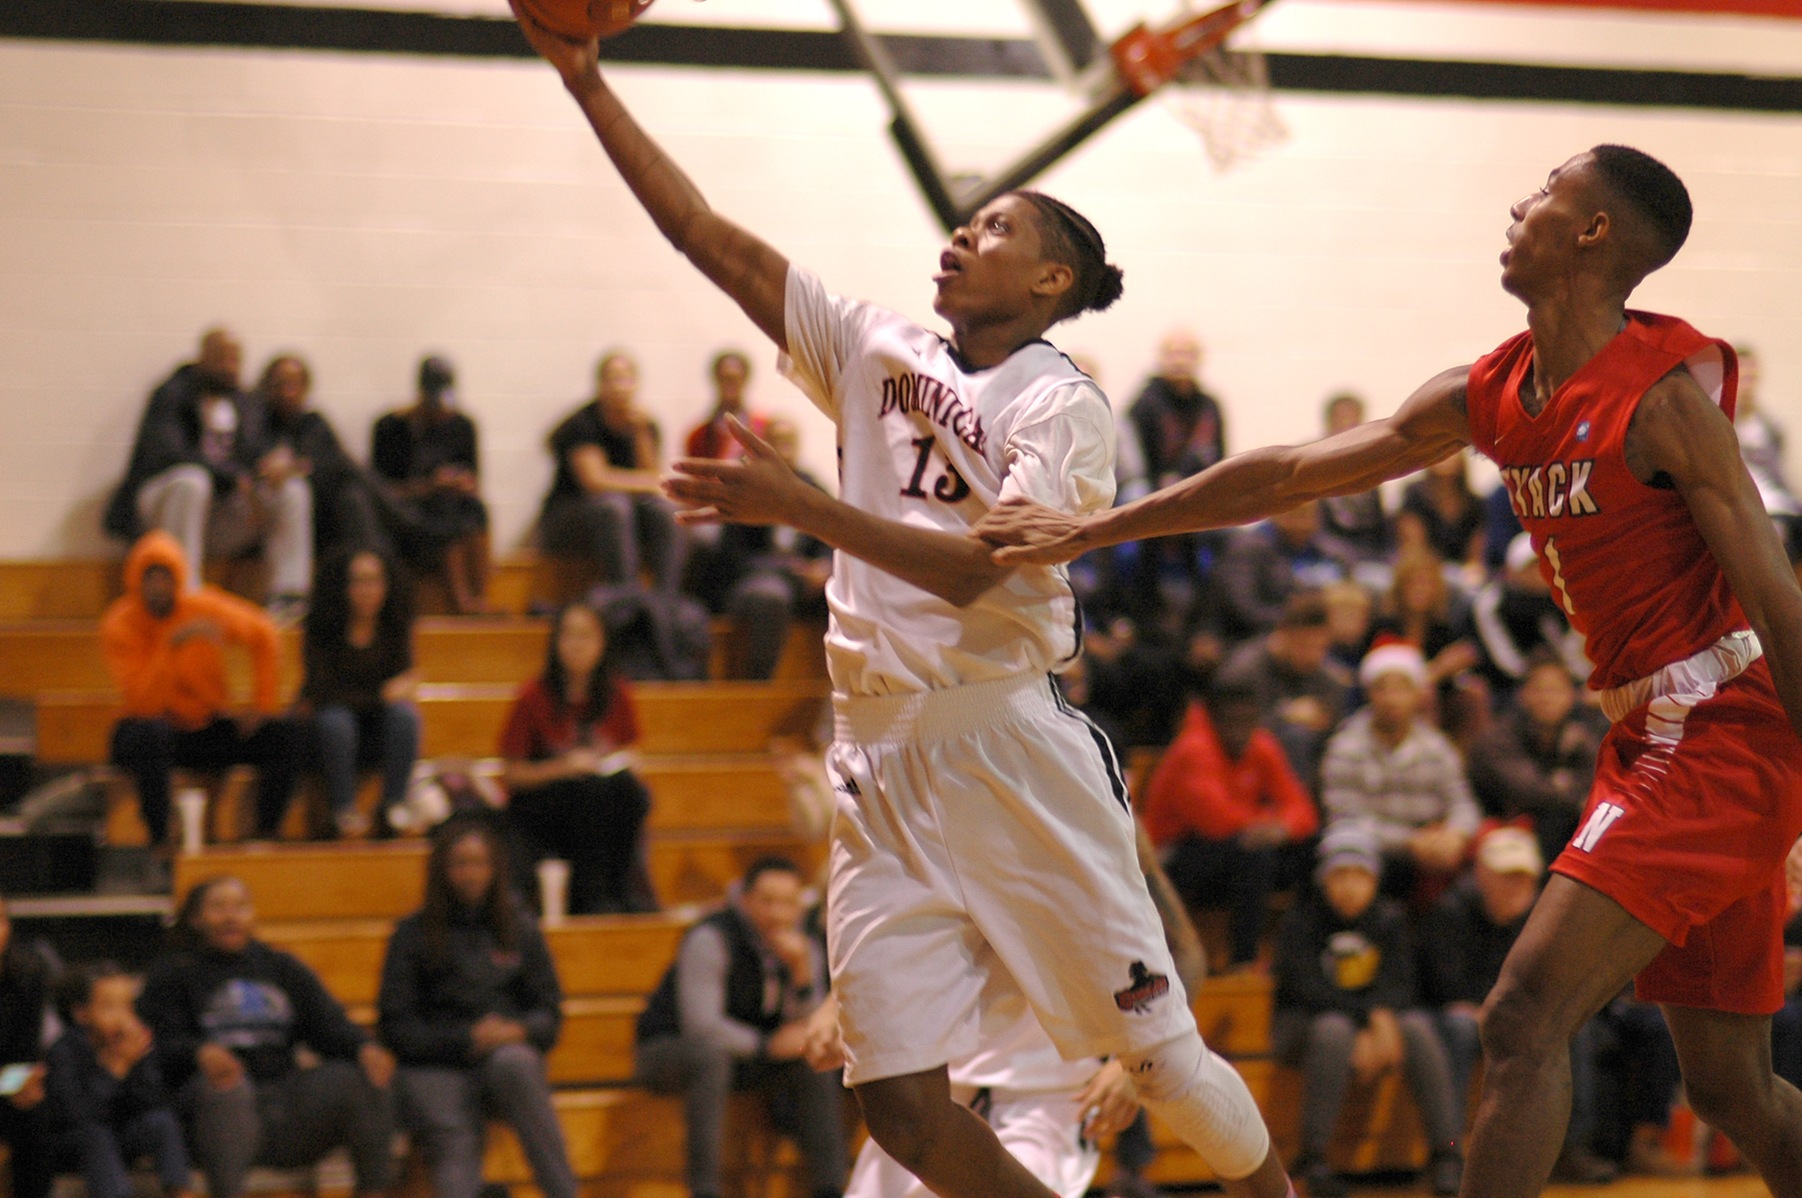 MEN'S BASKETBALL TURN BACK NYACK COLLEGE IN 2ND ANNUAL MIKE COFFEY GAME